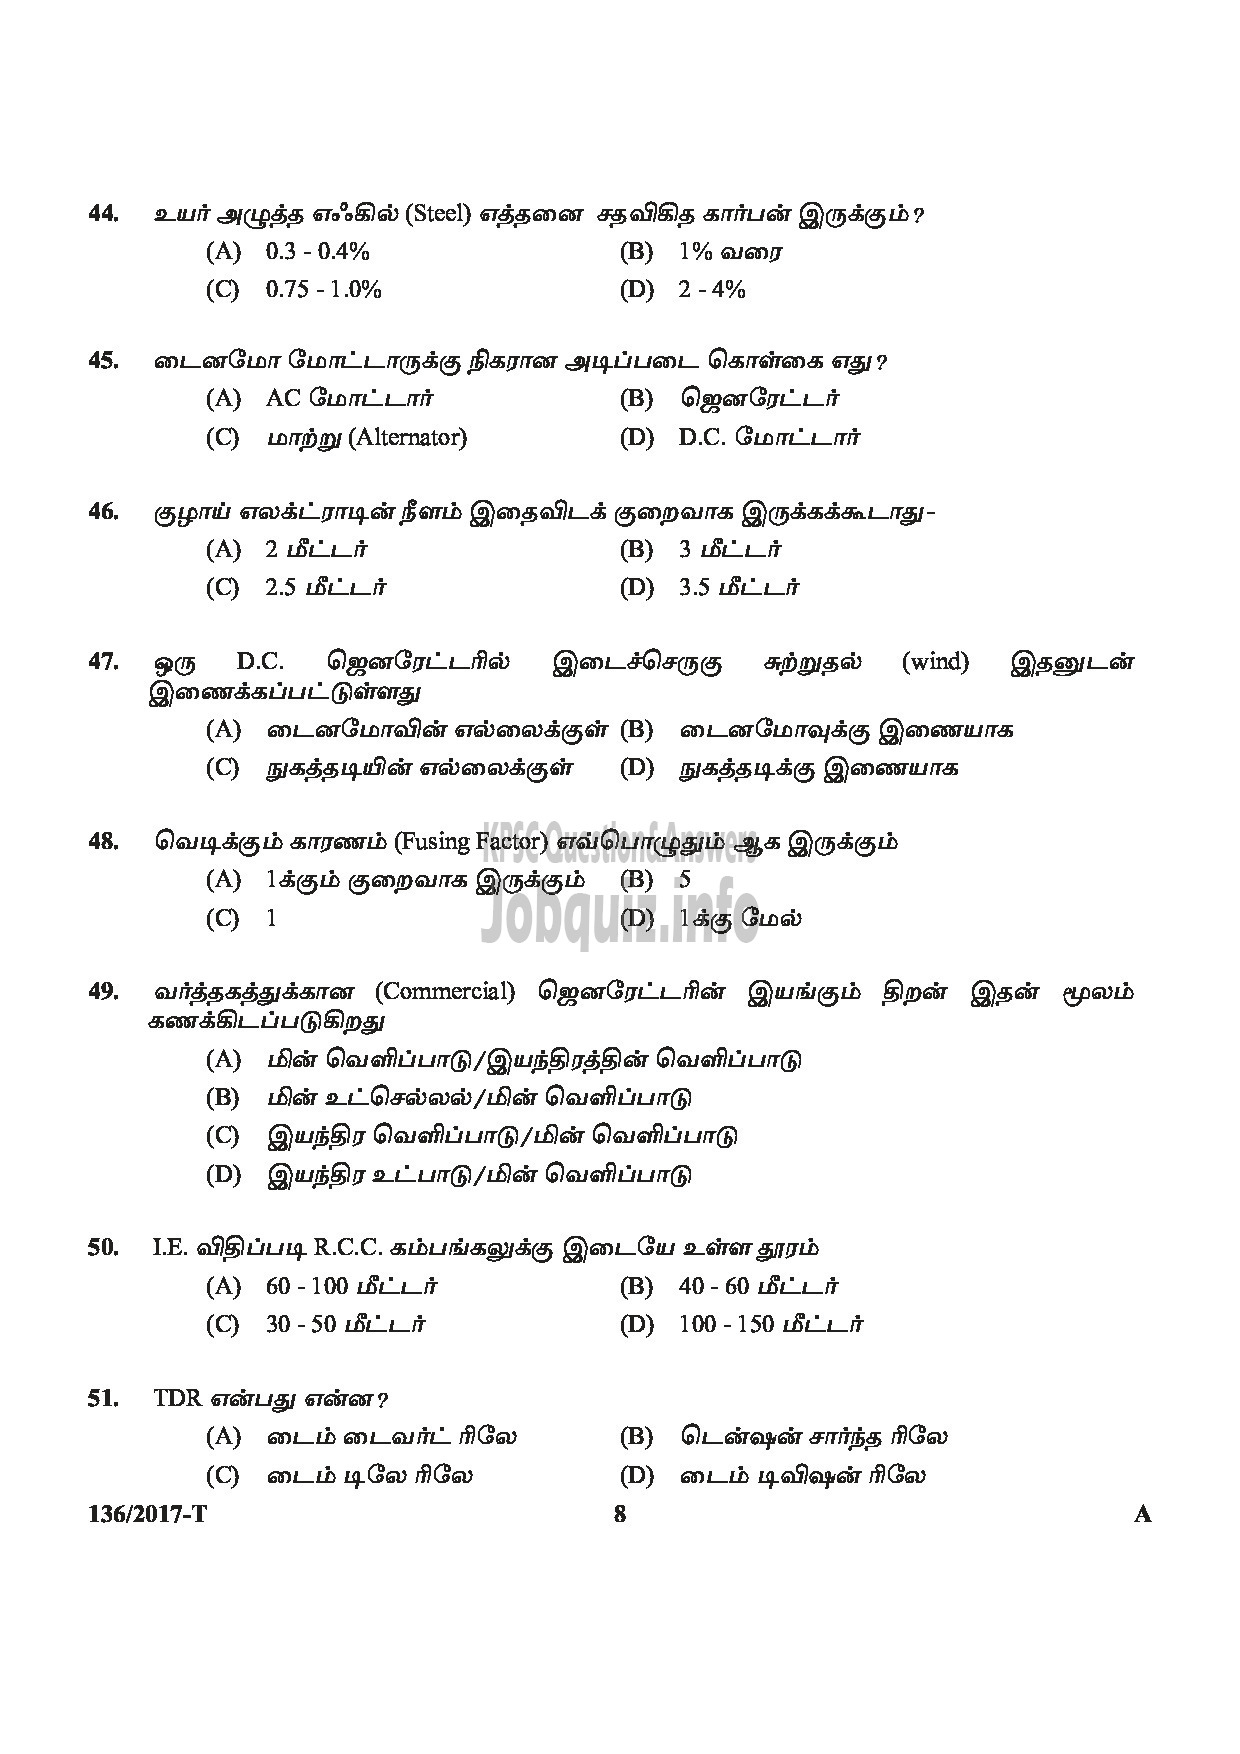 Kerala PSC Question Paper - METER READER/SPOT BILLER SPECIAL RECRUITMENT FROM AMONG ST ONLY MEDIUM OF QUESTION TAMIL-8